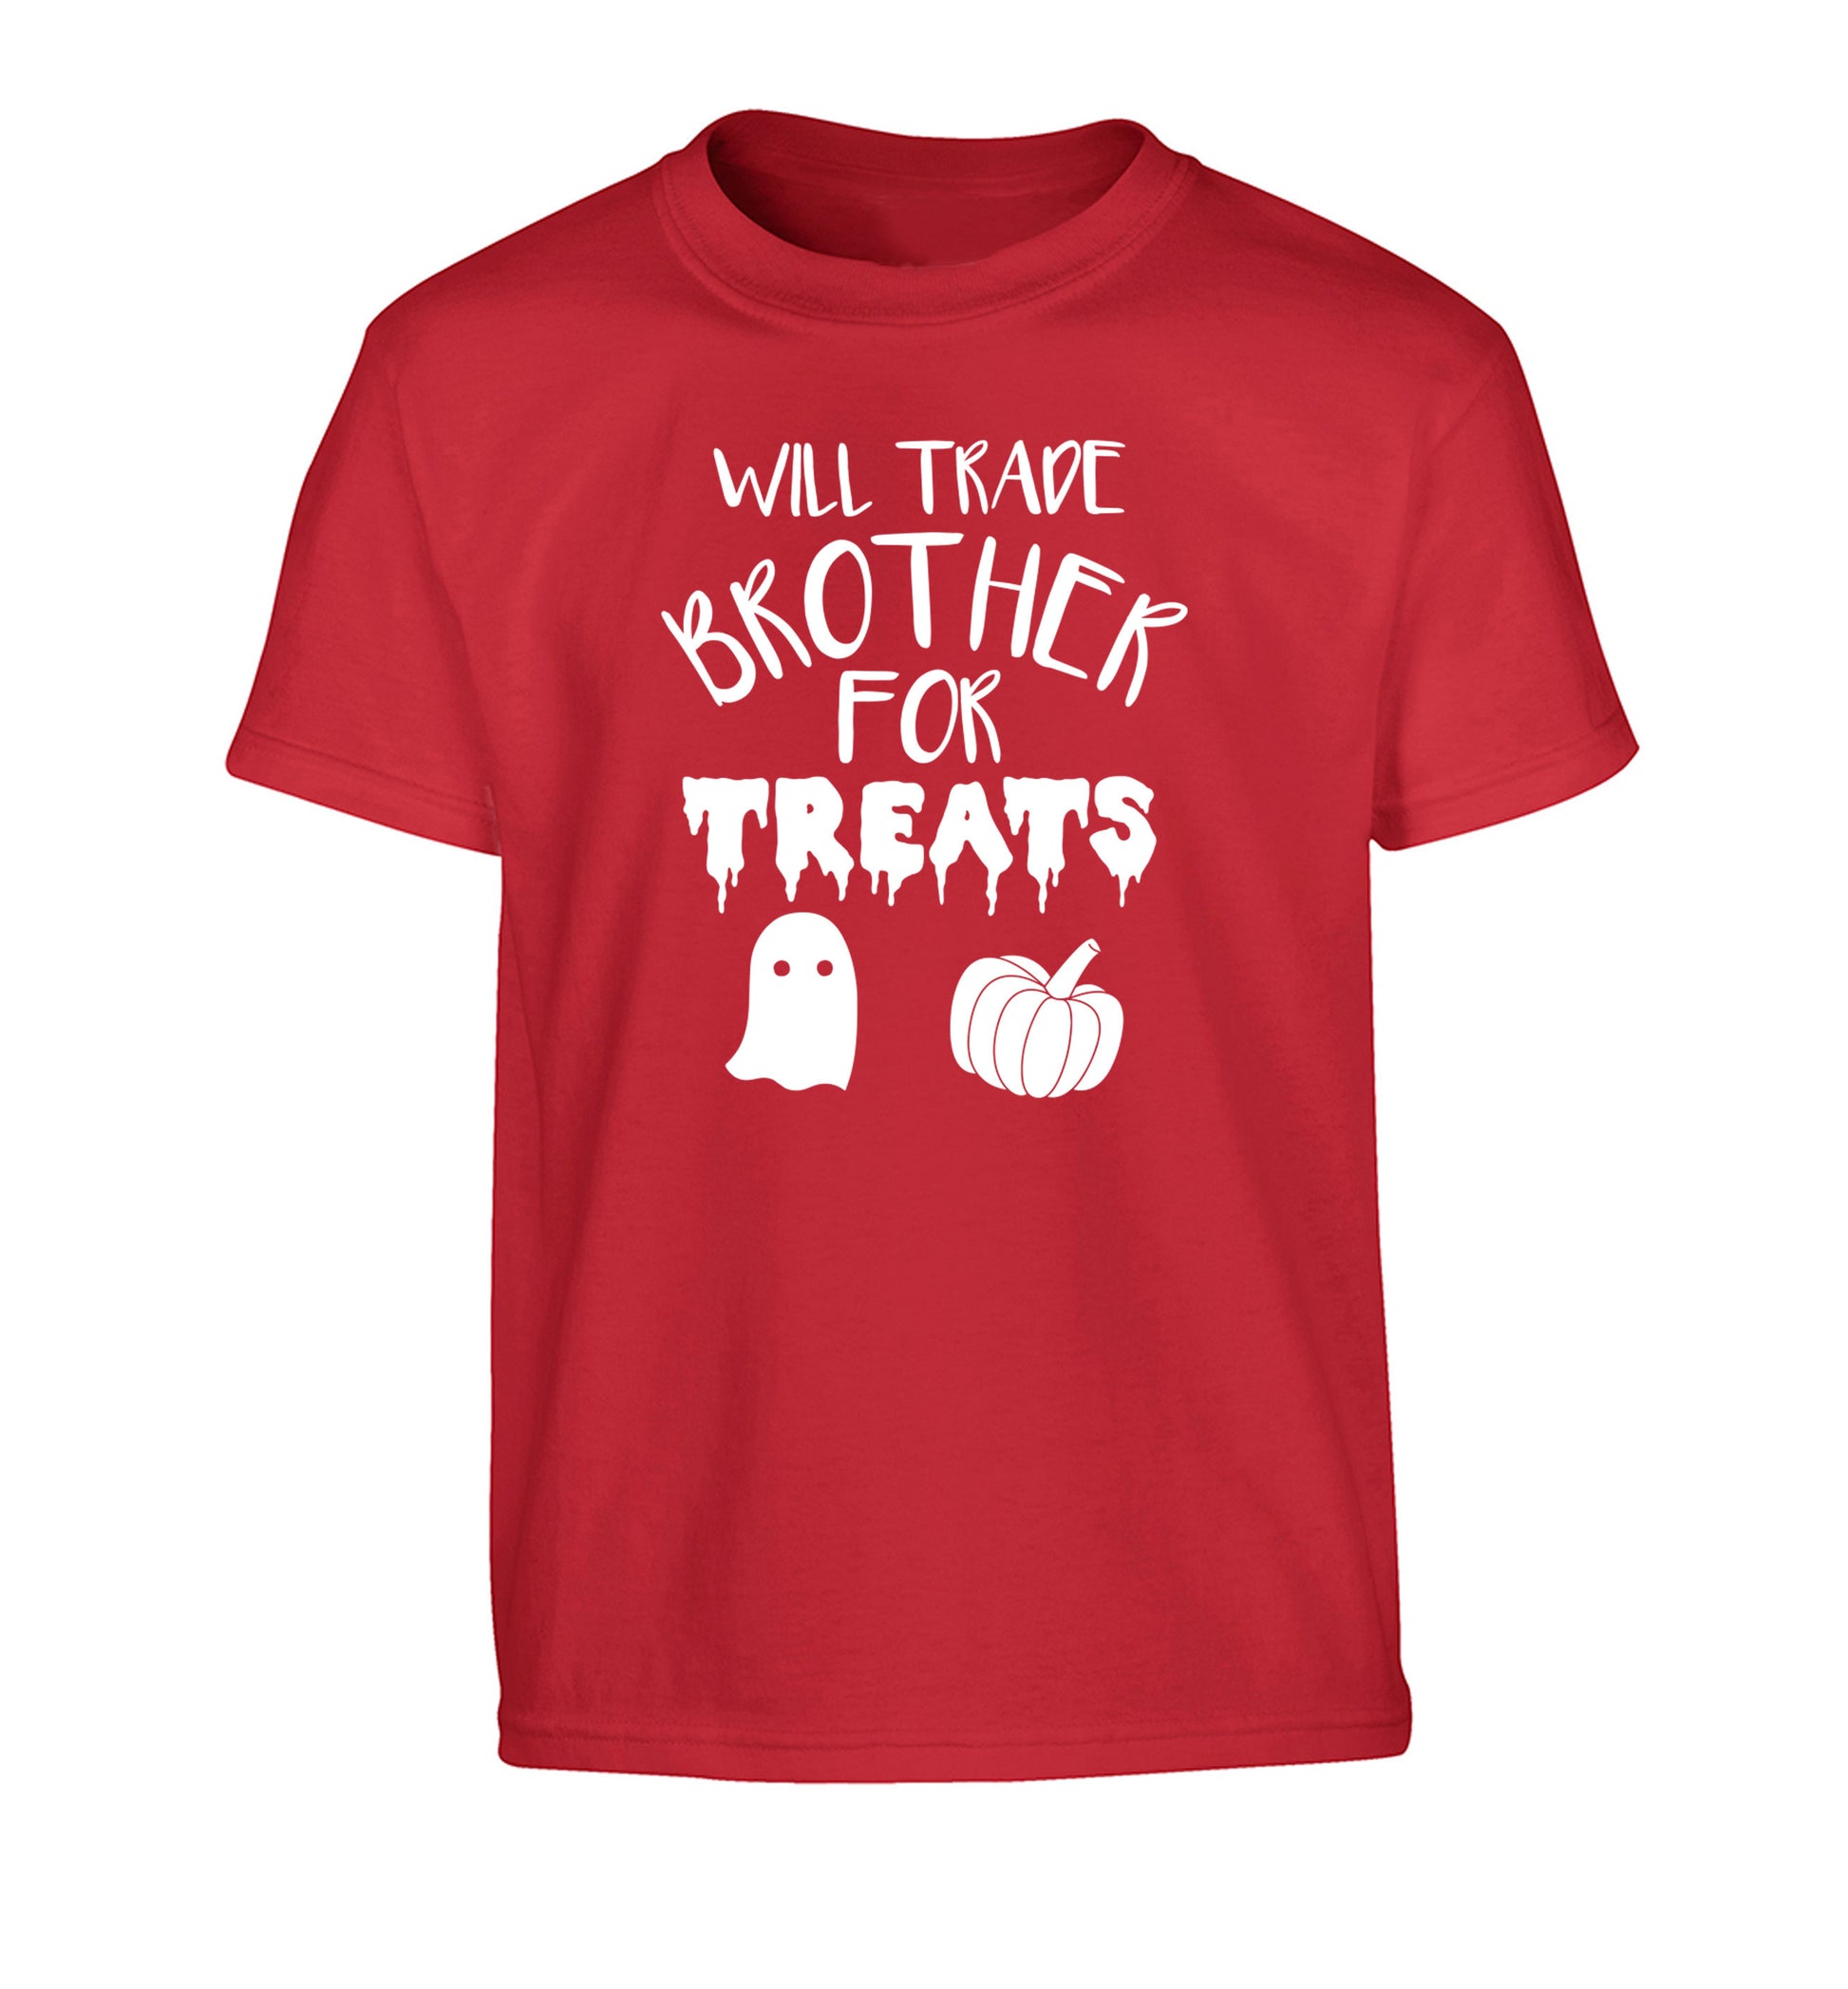 Will trade brother for treats Children's red Tshirt 12-14 Years